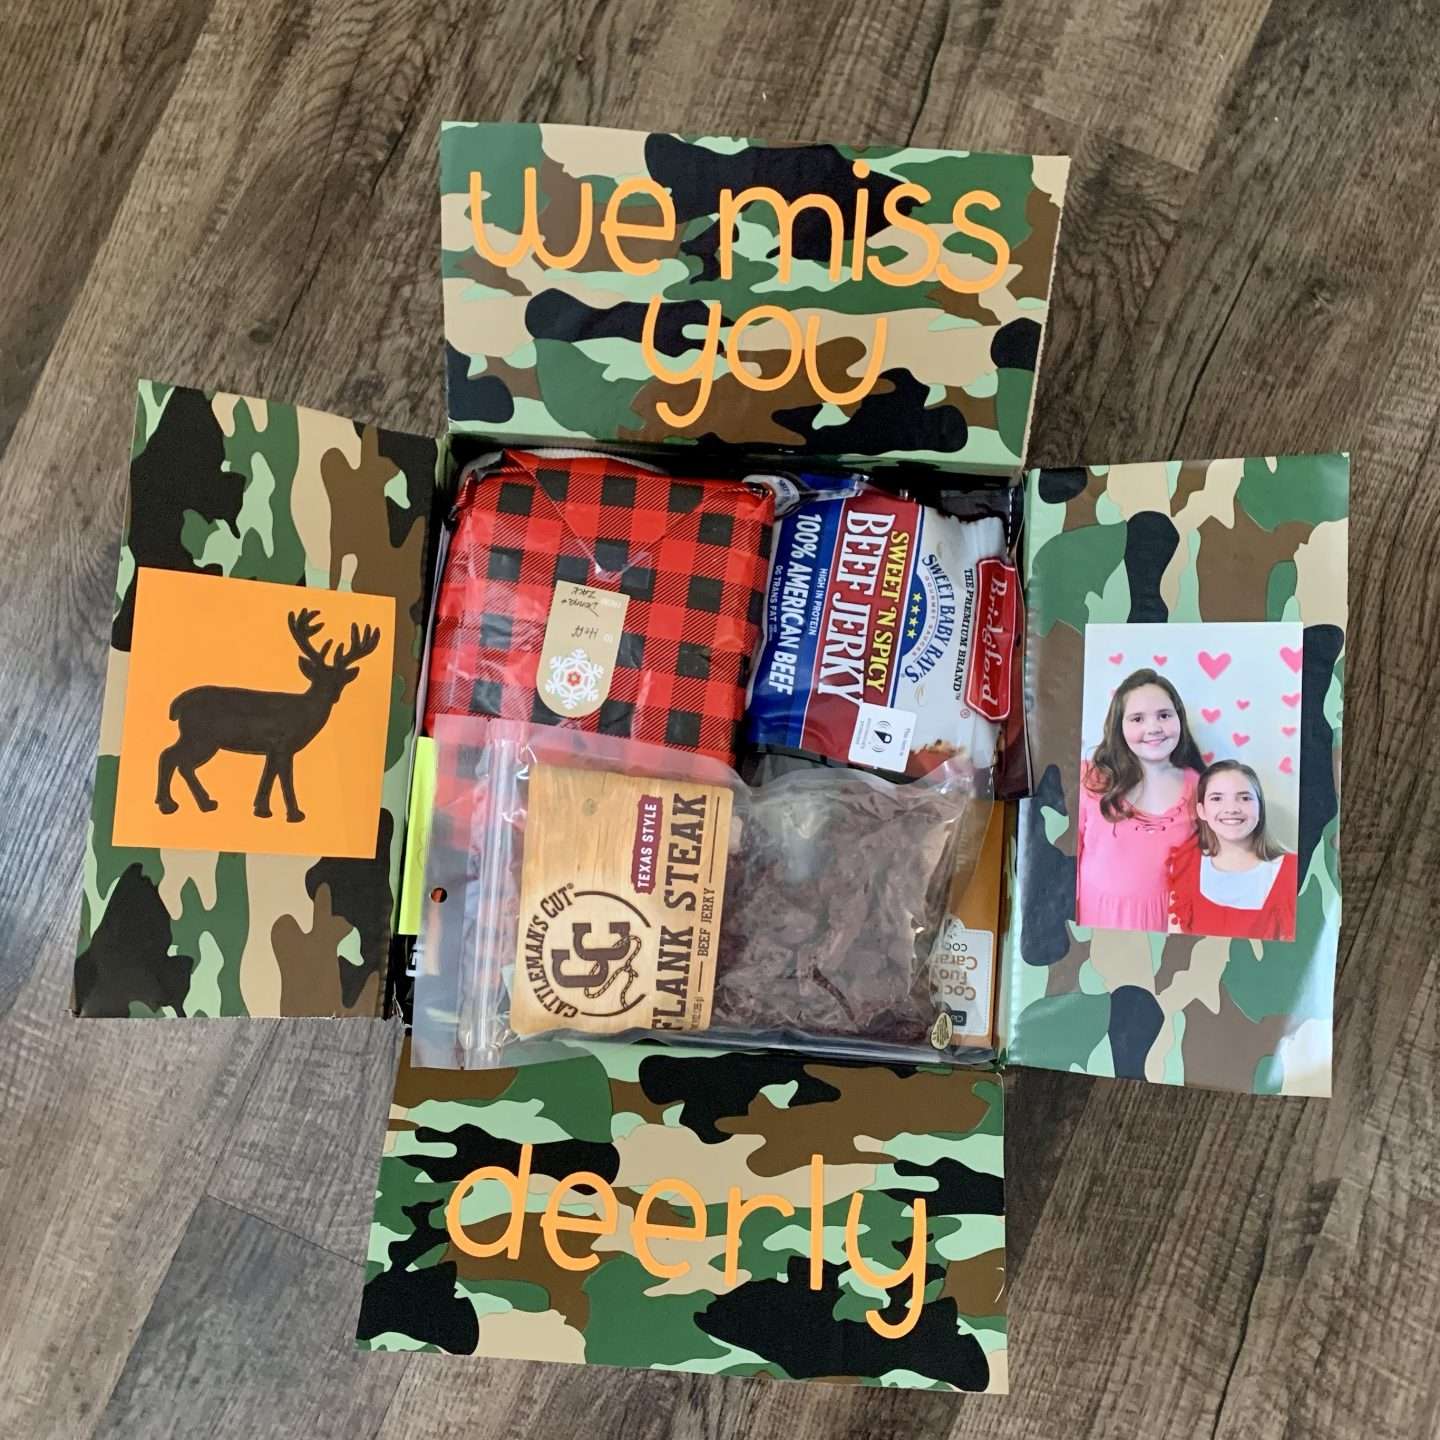 Deployment Care Packages: We miss you deerly camo themed.